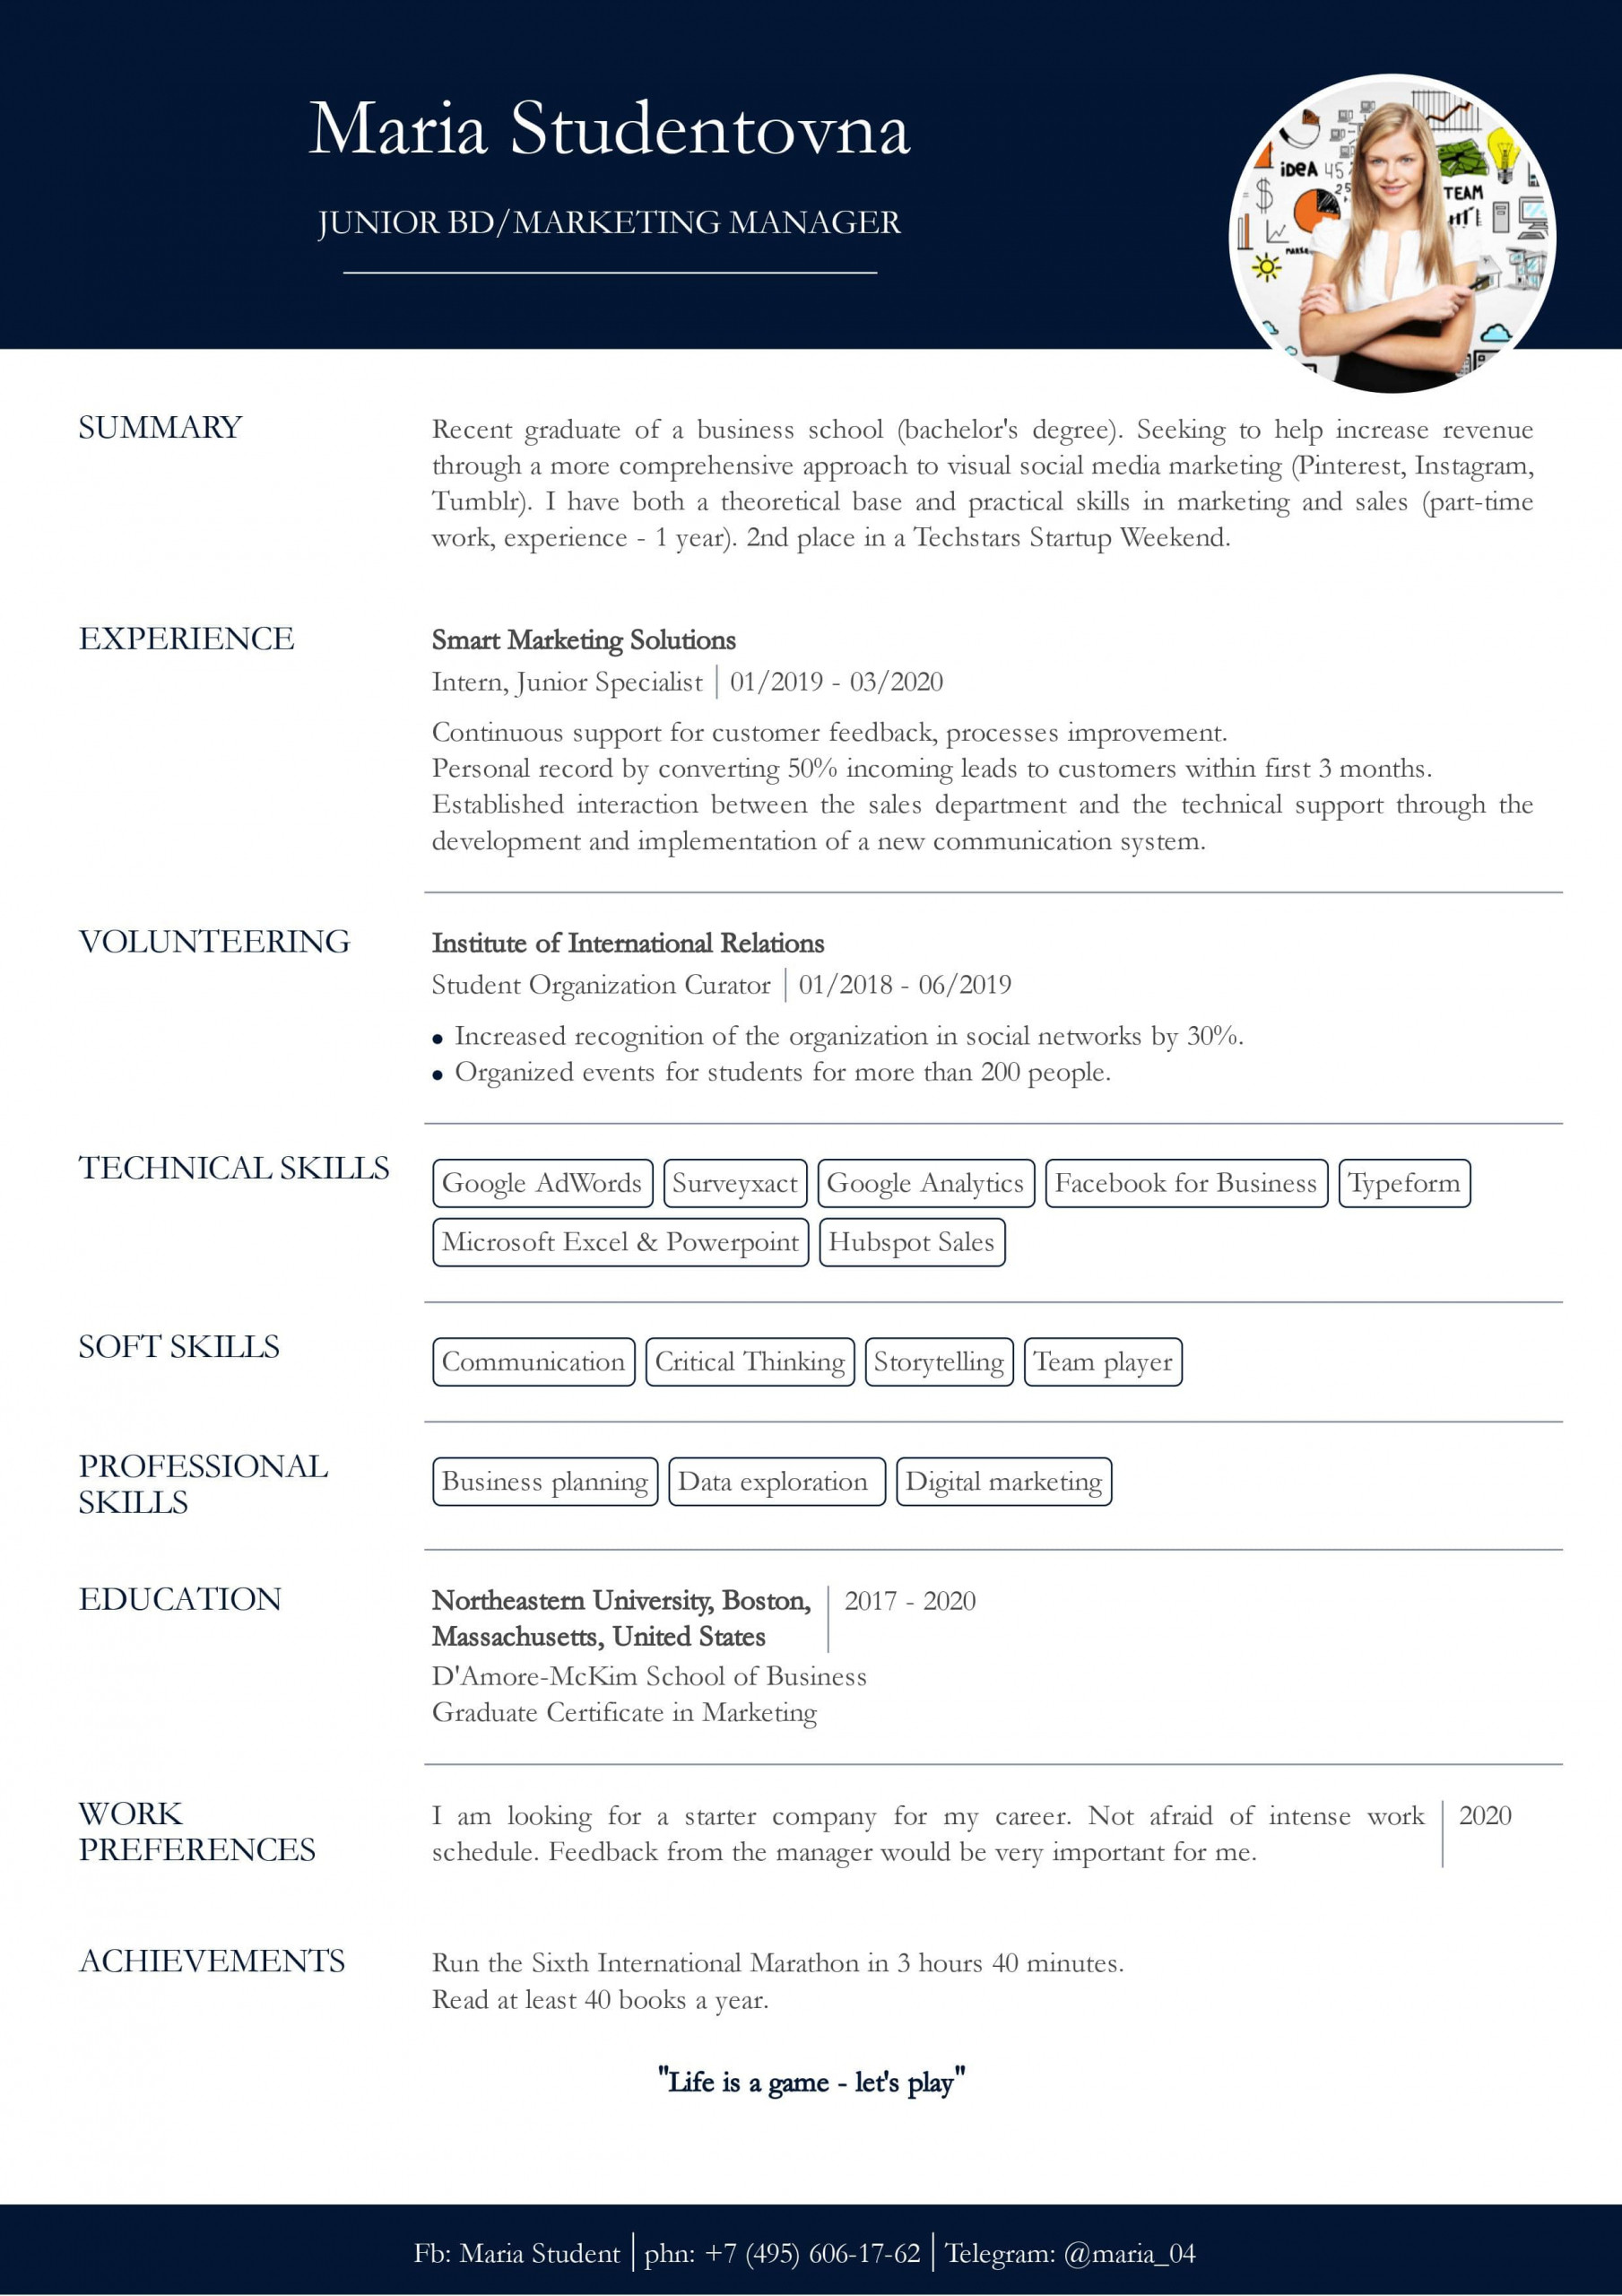 Resume Samples for College Student who Has Not yet Graduated Resume with No Work Experience. Sample for Students. – Cv2you Blog